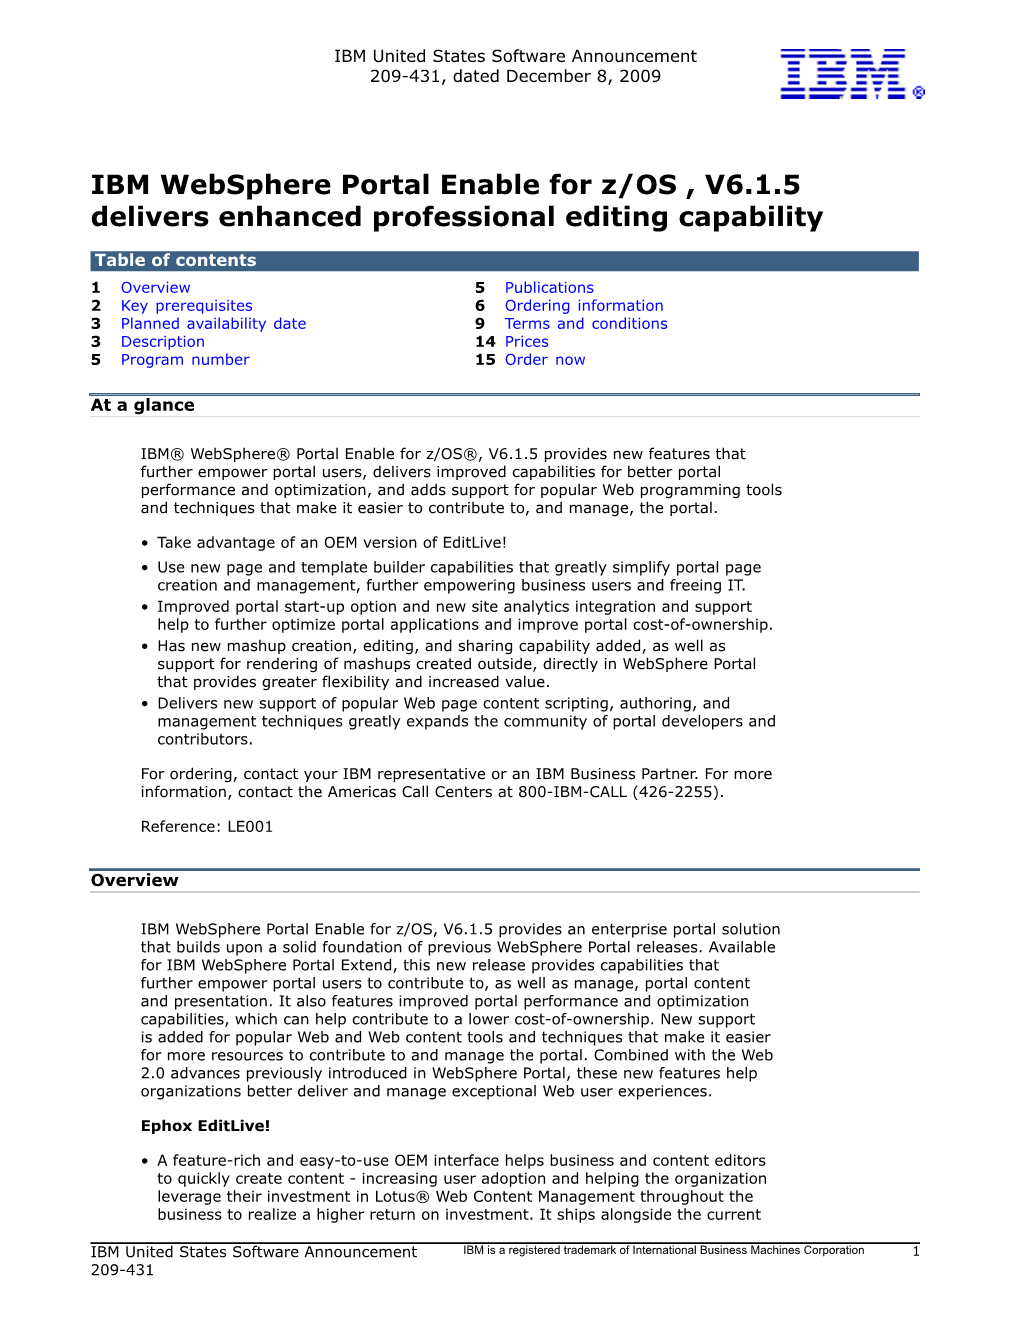 IBM Websphere Portal Enable for Z/OS , V6.1.5 Delivers Enhanced Professional Editing Capability